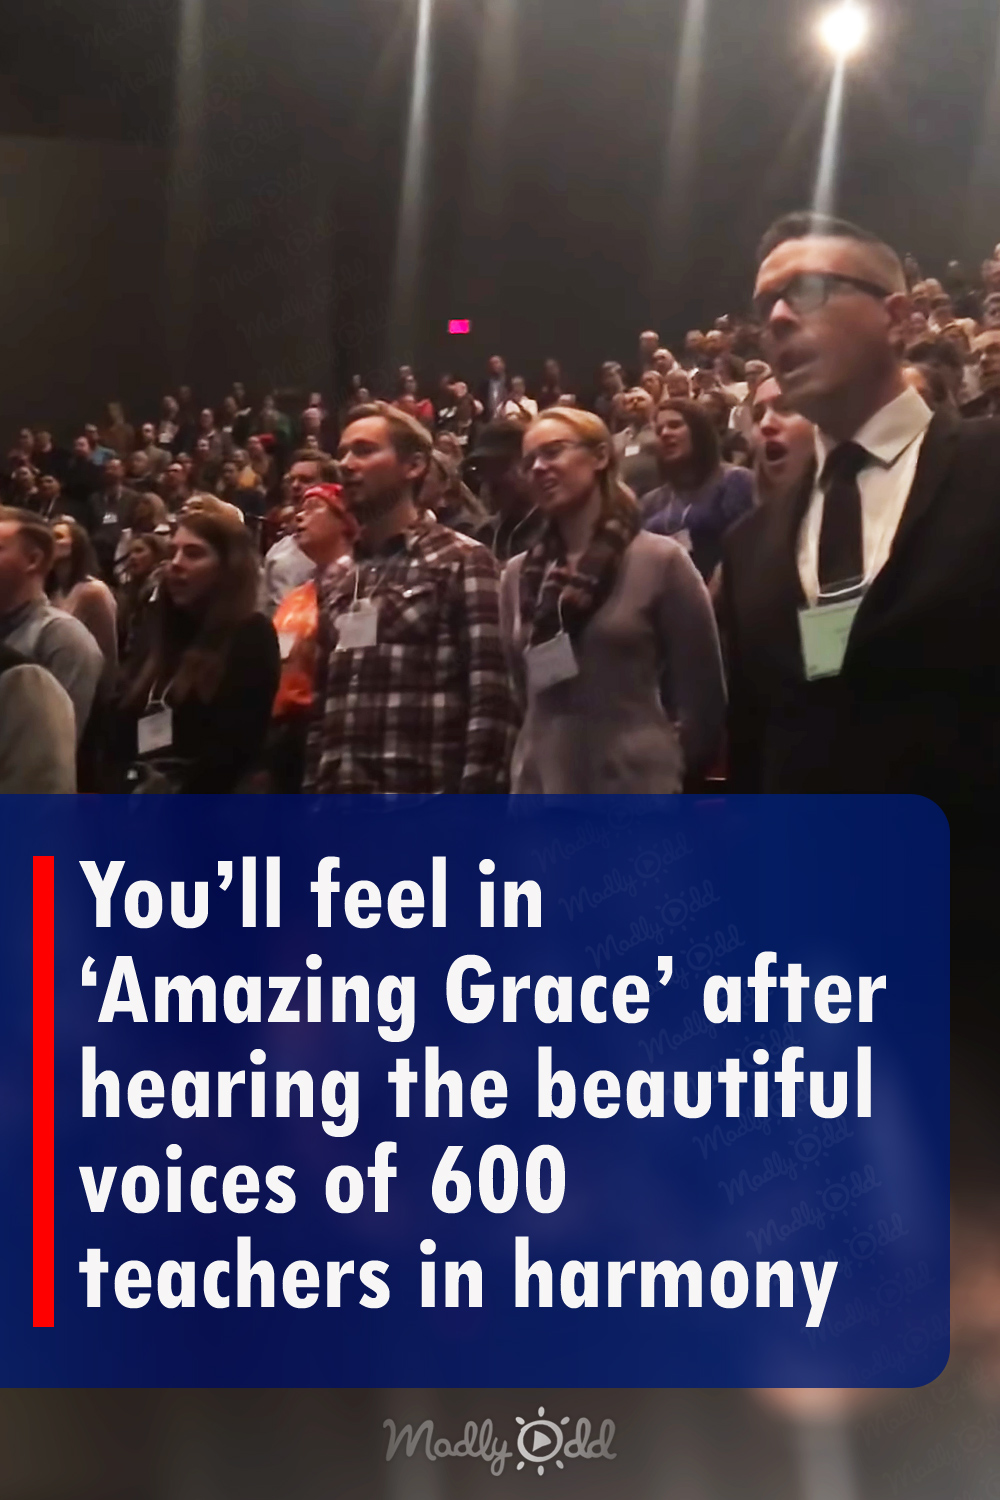 You’ll feel in ‘Amazing Grace’ after hearing the beautiful voices of 600 teachers in harmony